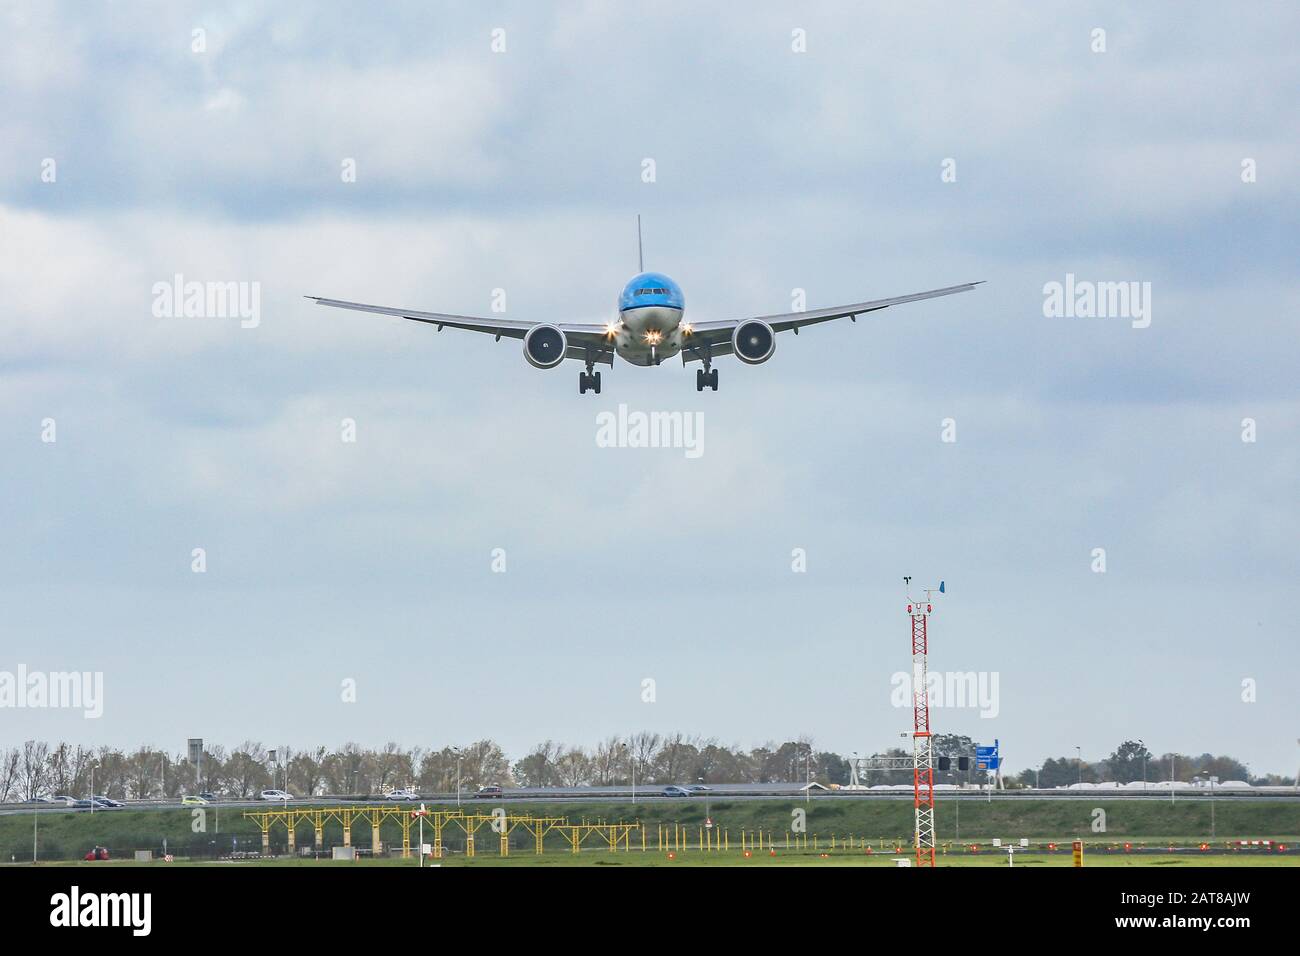 A KLM Royal Dutch Airlines Boeing 777-300 wide-body aircraft lands at Amsterdam Schiphol AMS EHAM Airport in the Netherlands at Polderbaan runway. The airplane has ETOPS certification for transatlantic flight. Stock Photo